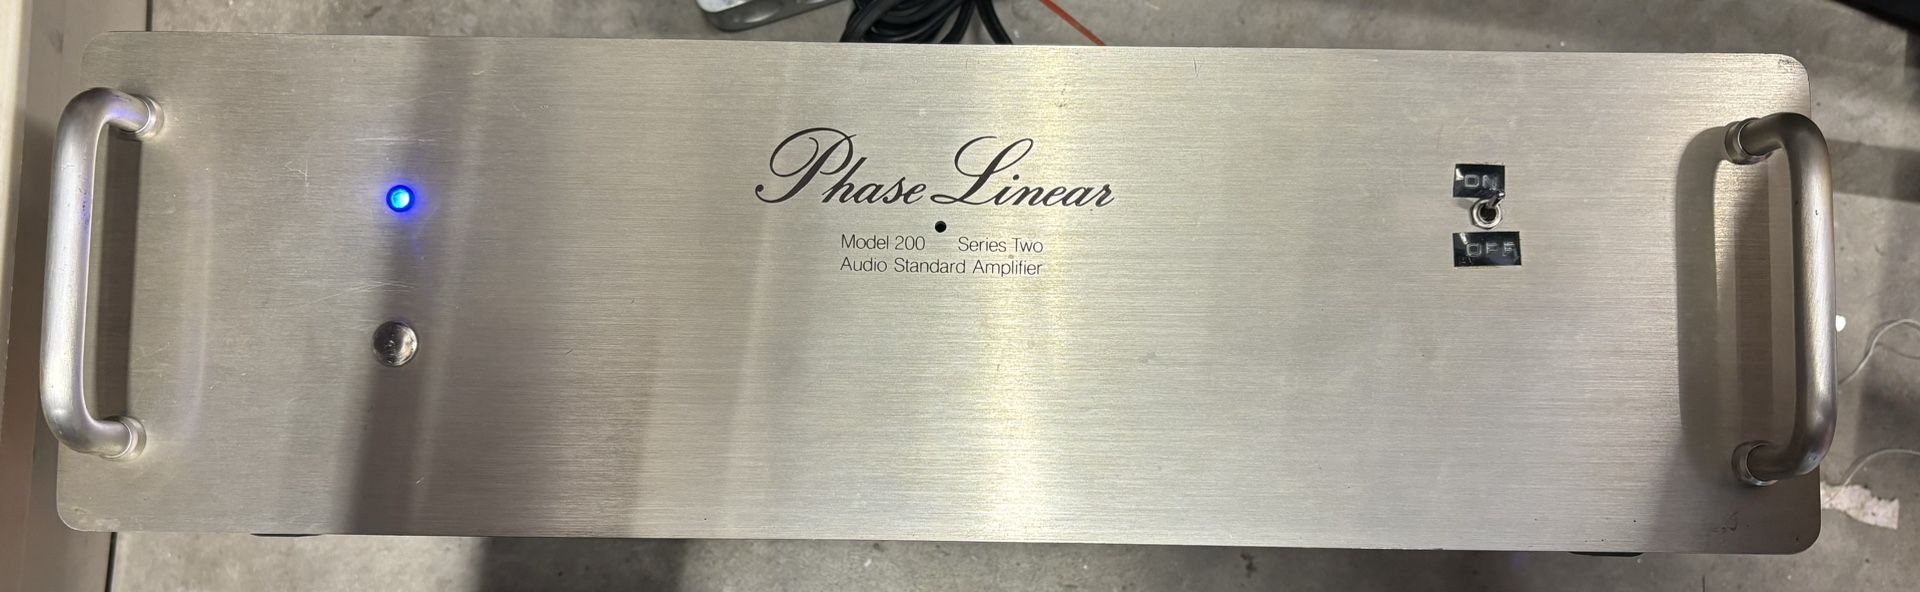 Phase Linear 200 Series 2 Amplifier 